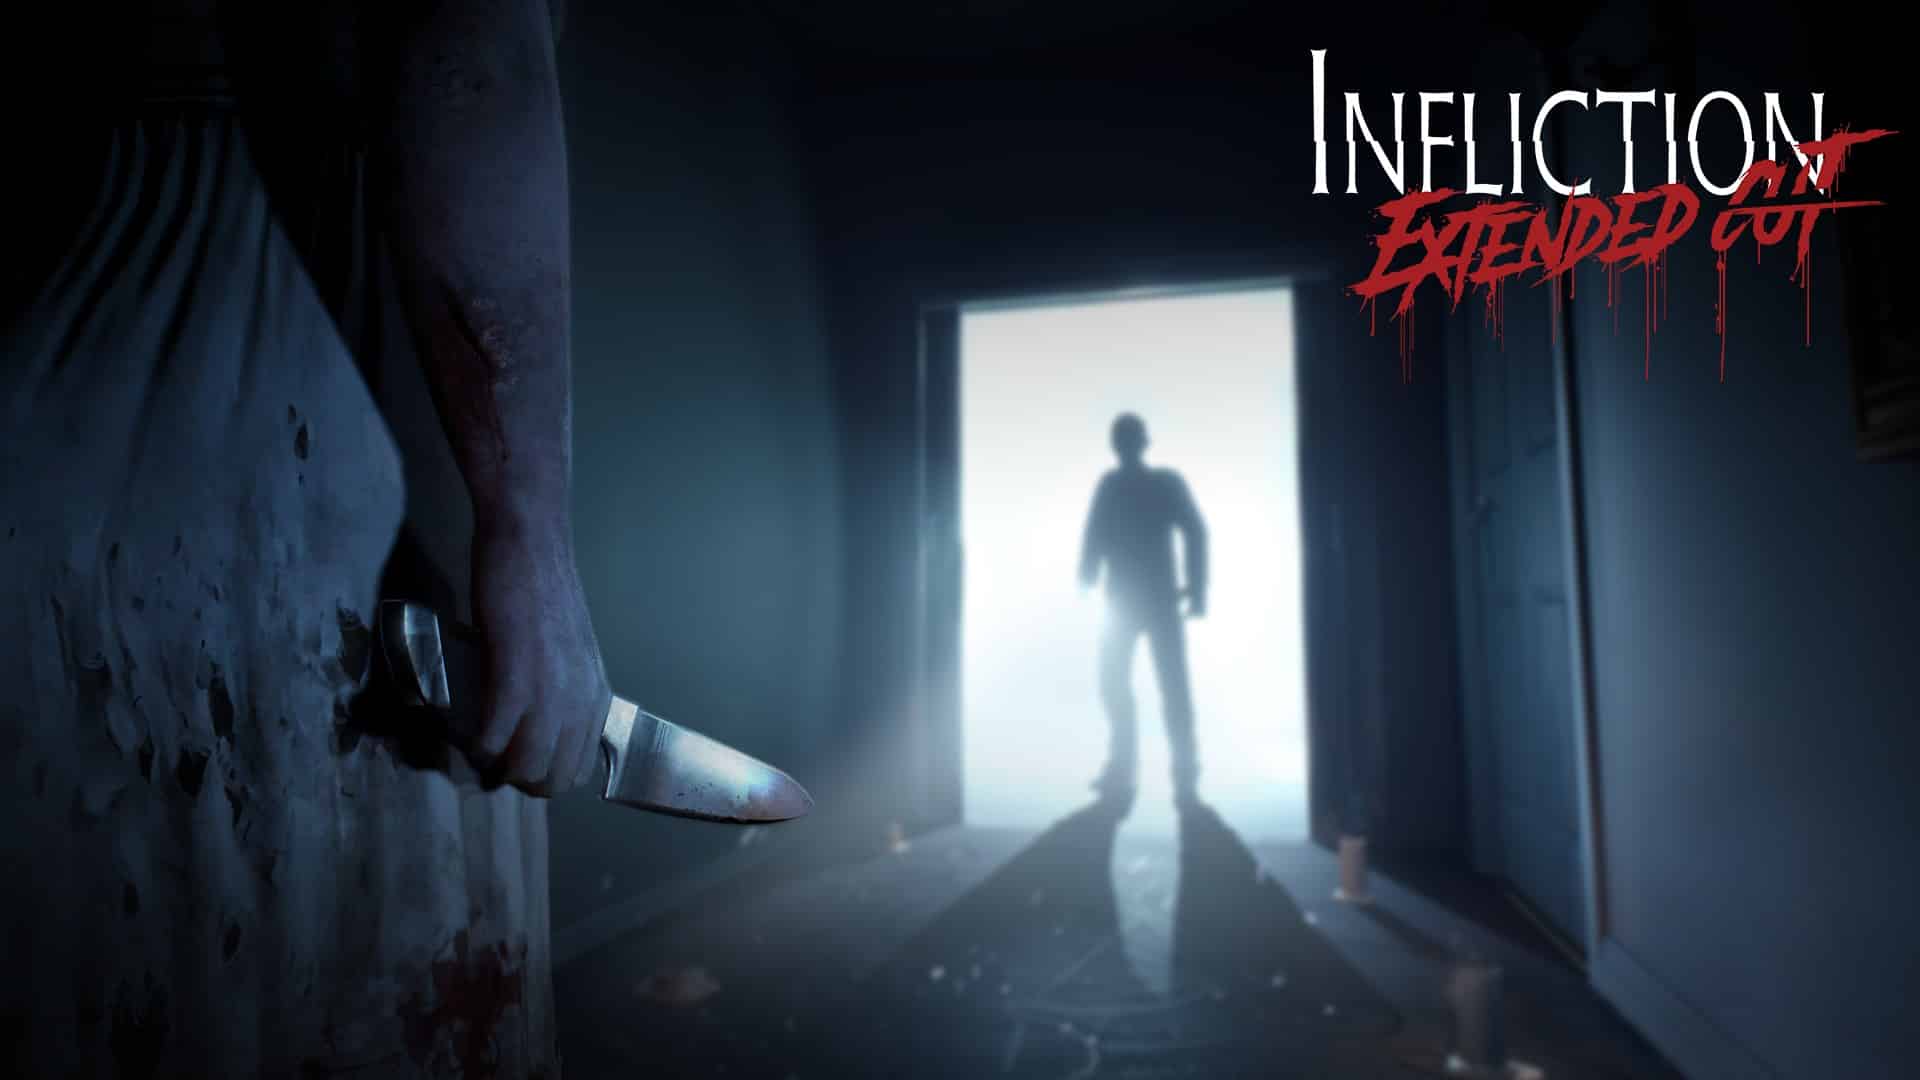 Infliction: Extended Cut player count stats